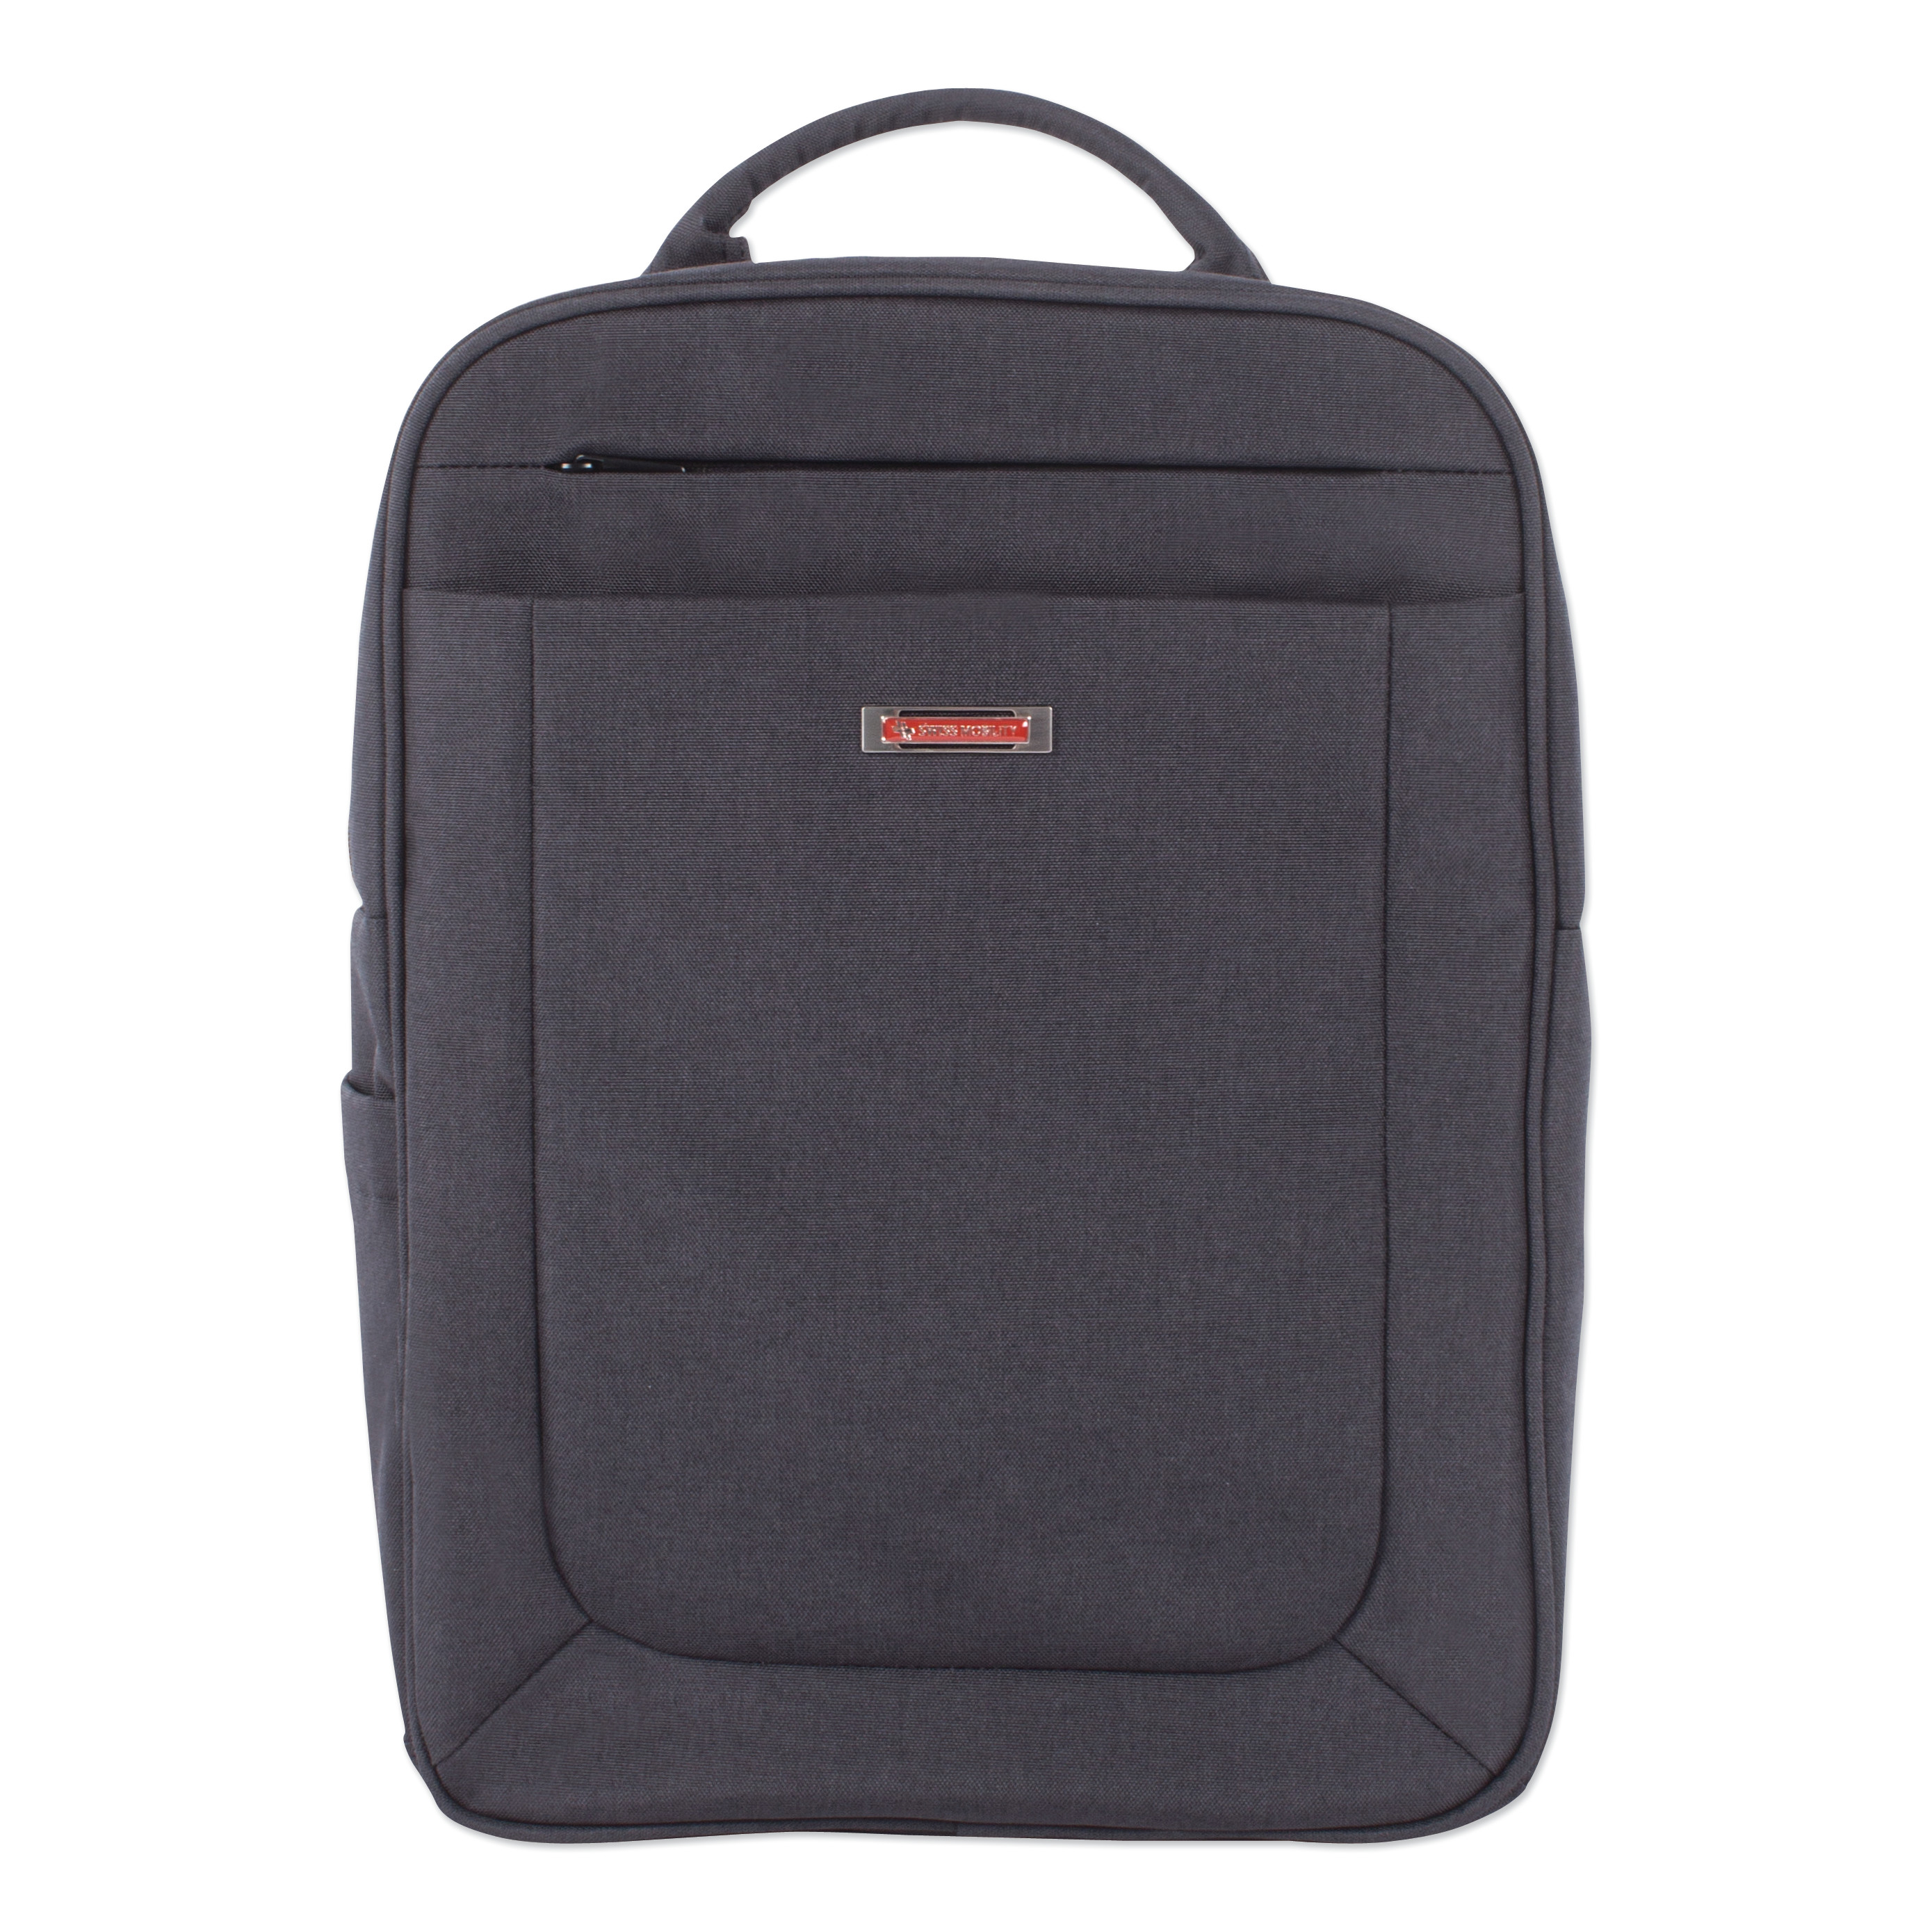 Swiss Mobility Cadence 2 Section Business Backpack, For Laptops 15.6", 6" x 6" x 17", Charcoal -SWZBKP1012SMCH - image 1 of 5